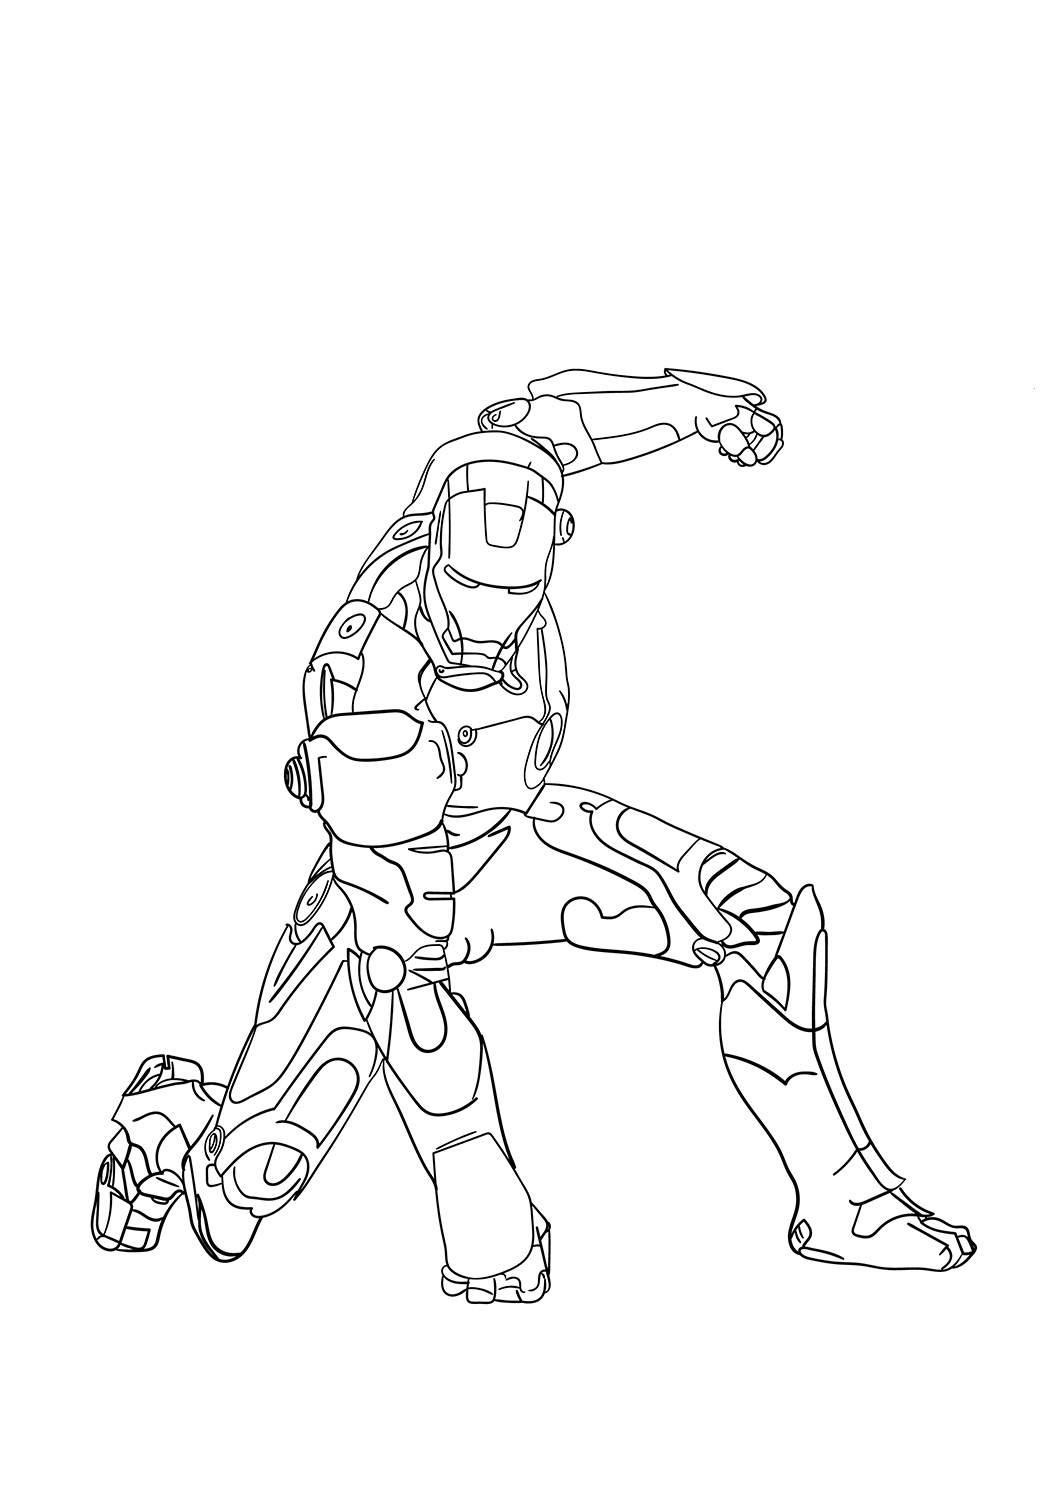 Strong Iron Man Coloring Page - Free Printable Coloring Pages for Kids